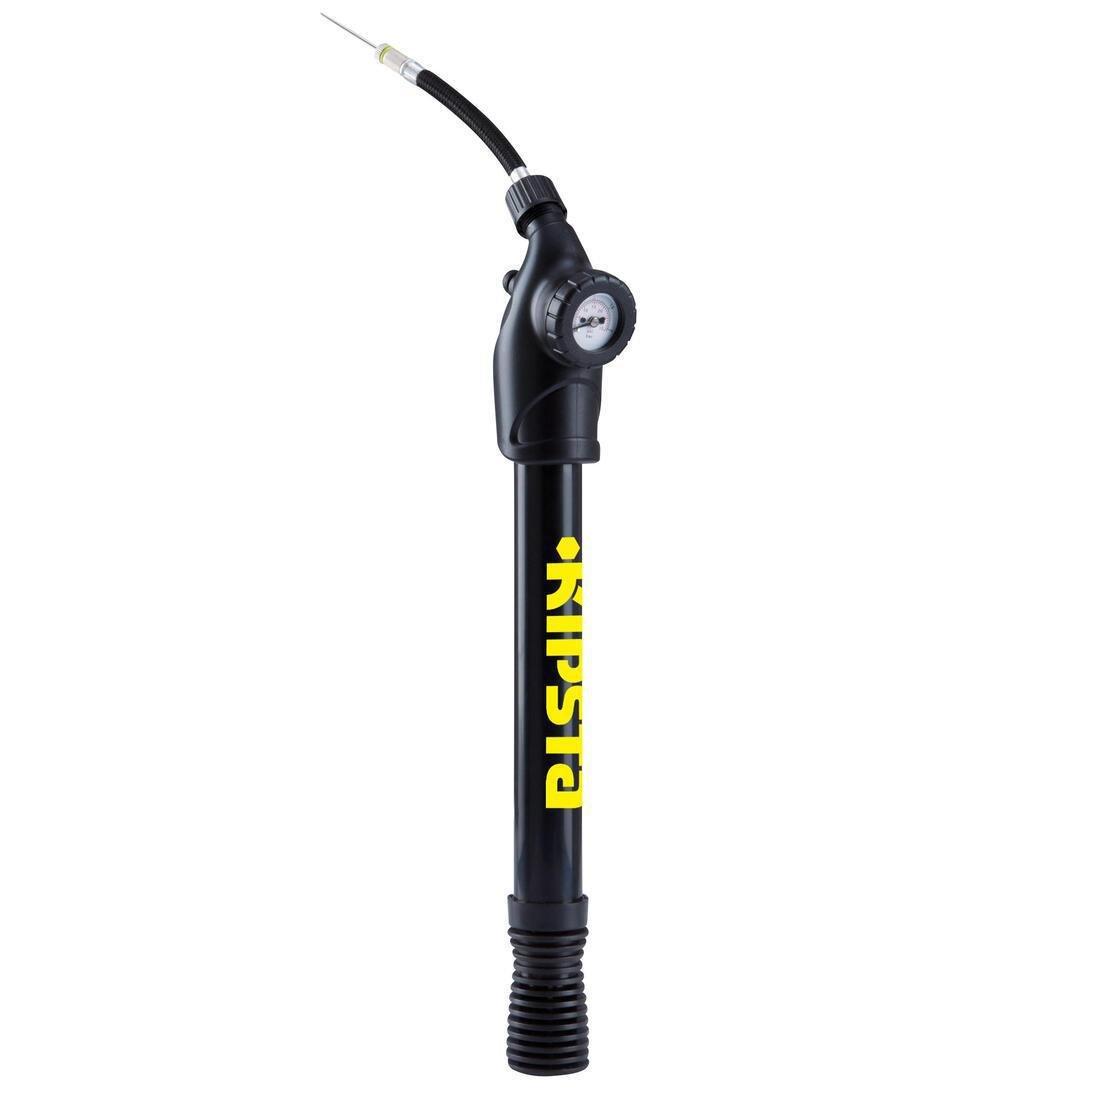 KIPSTA - Dual Action Ball Pump And Pressure Gauge with Hose